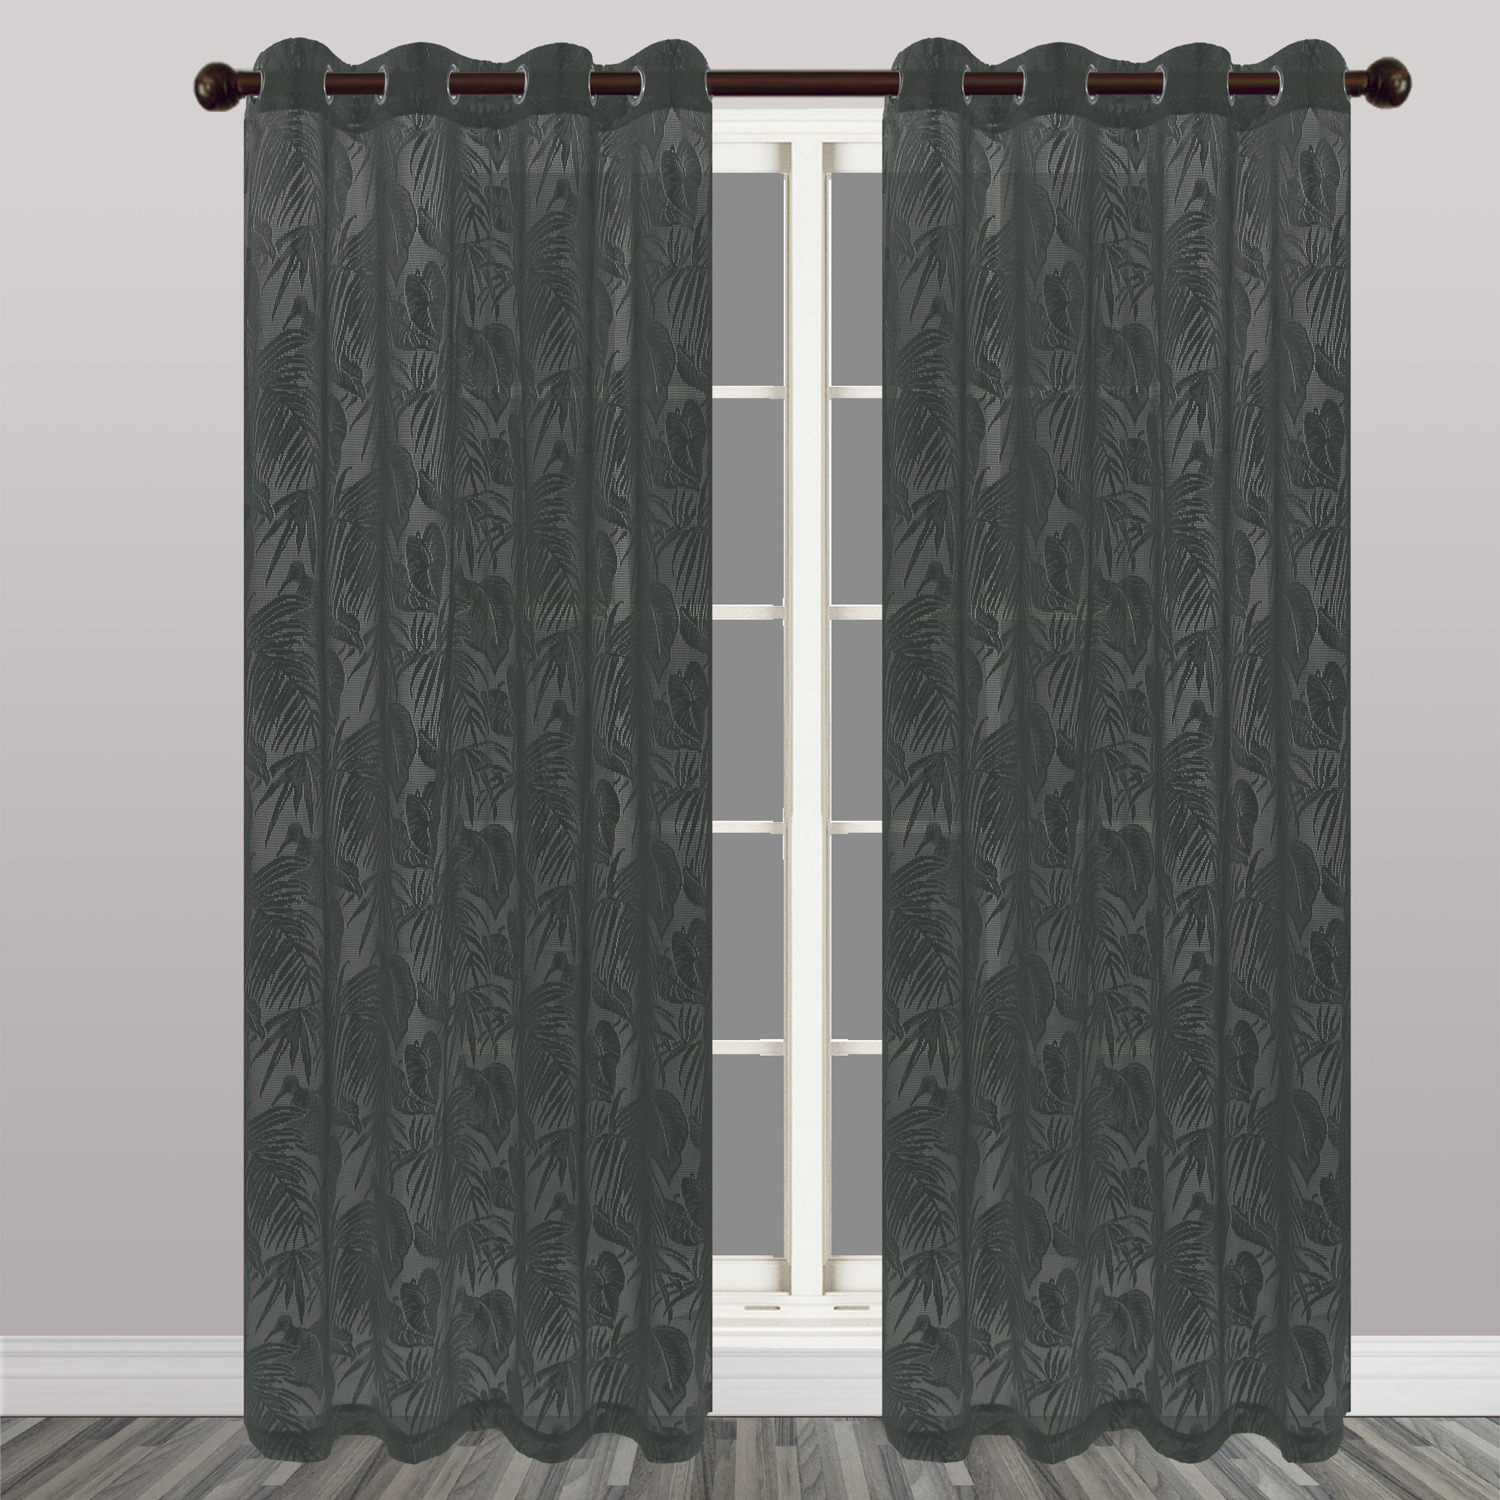 Embroidered sheer curtain panel with metal grommets, 54"x84"